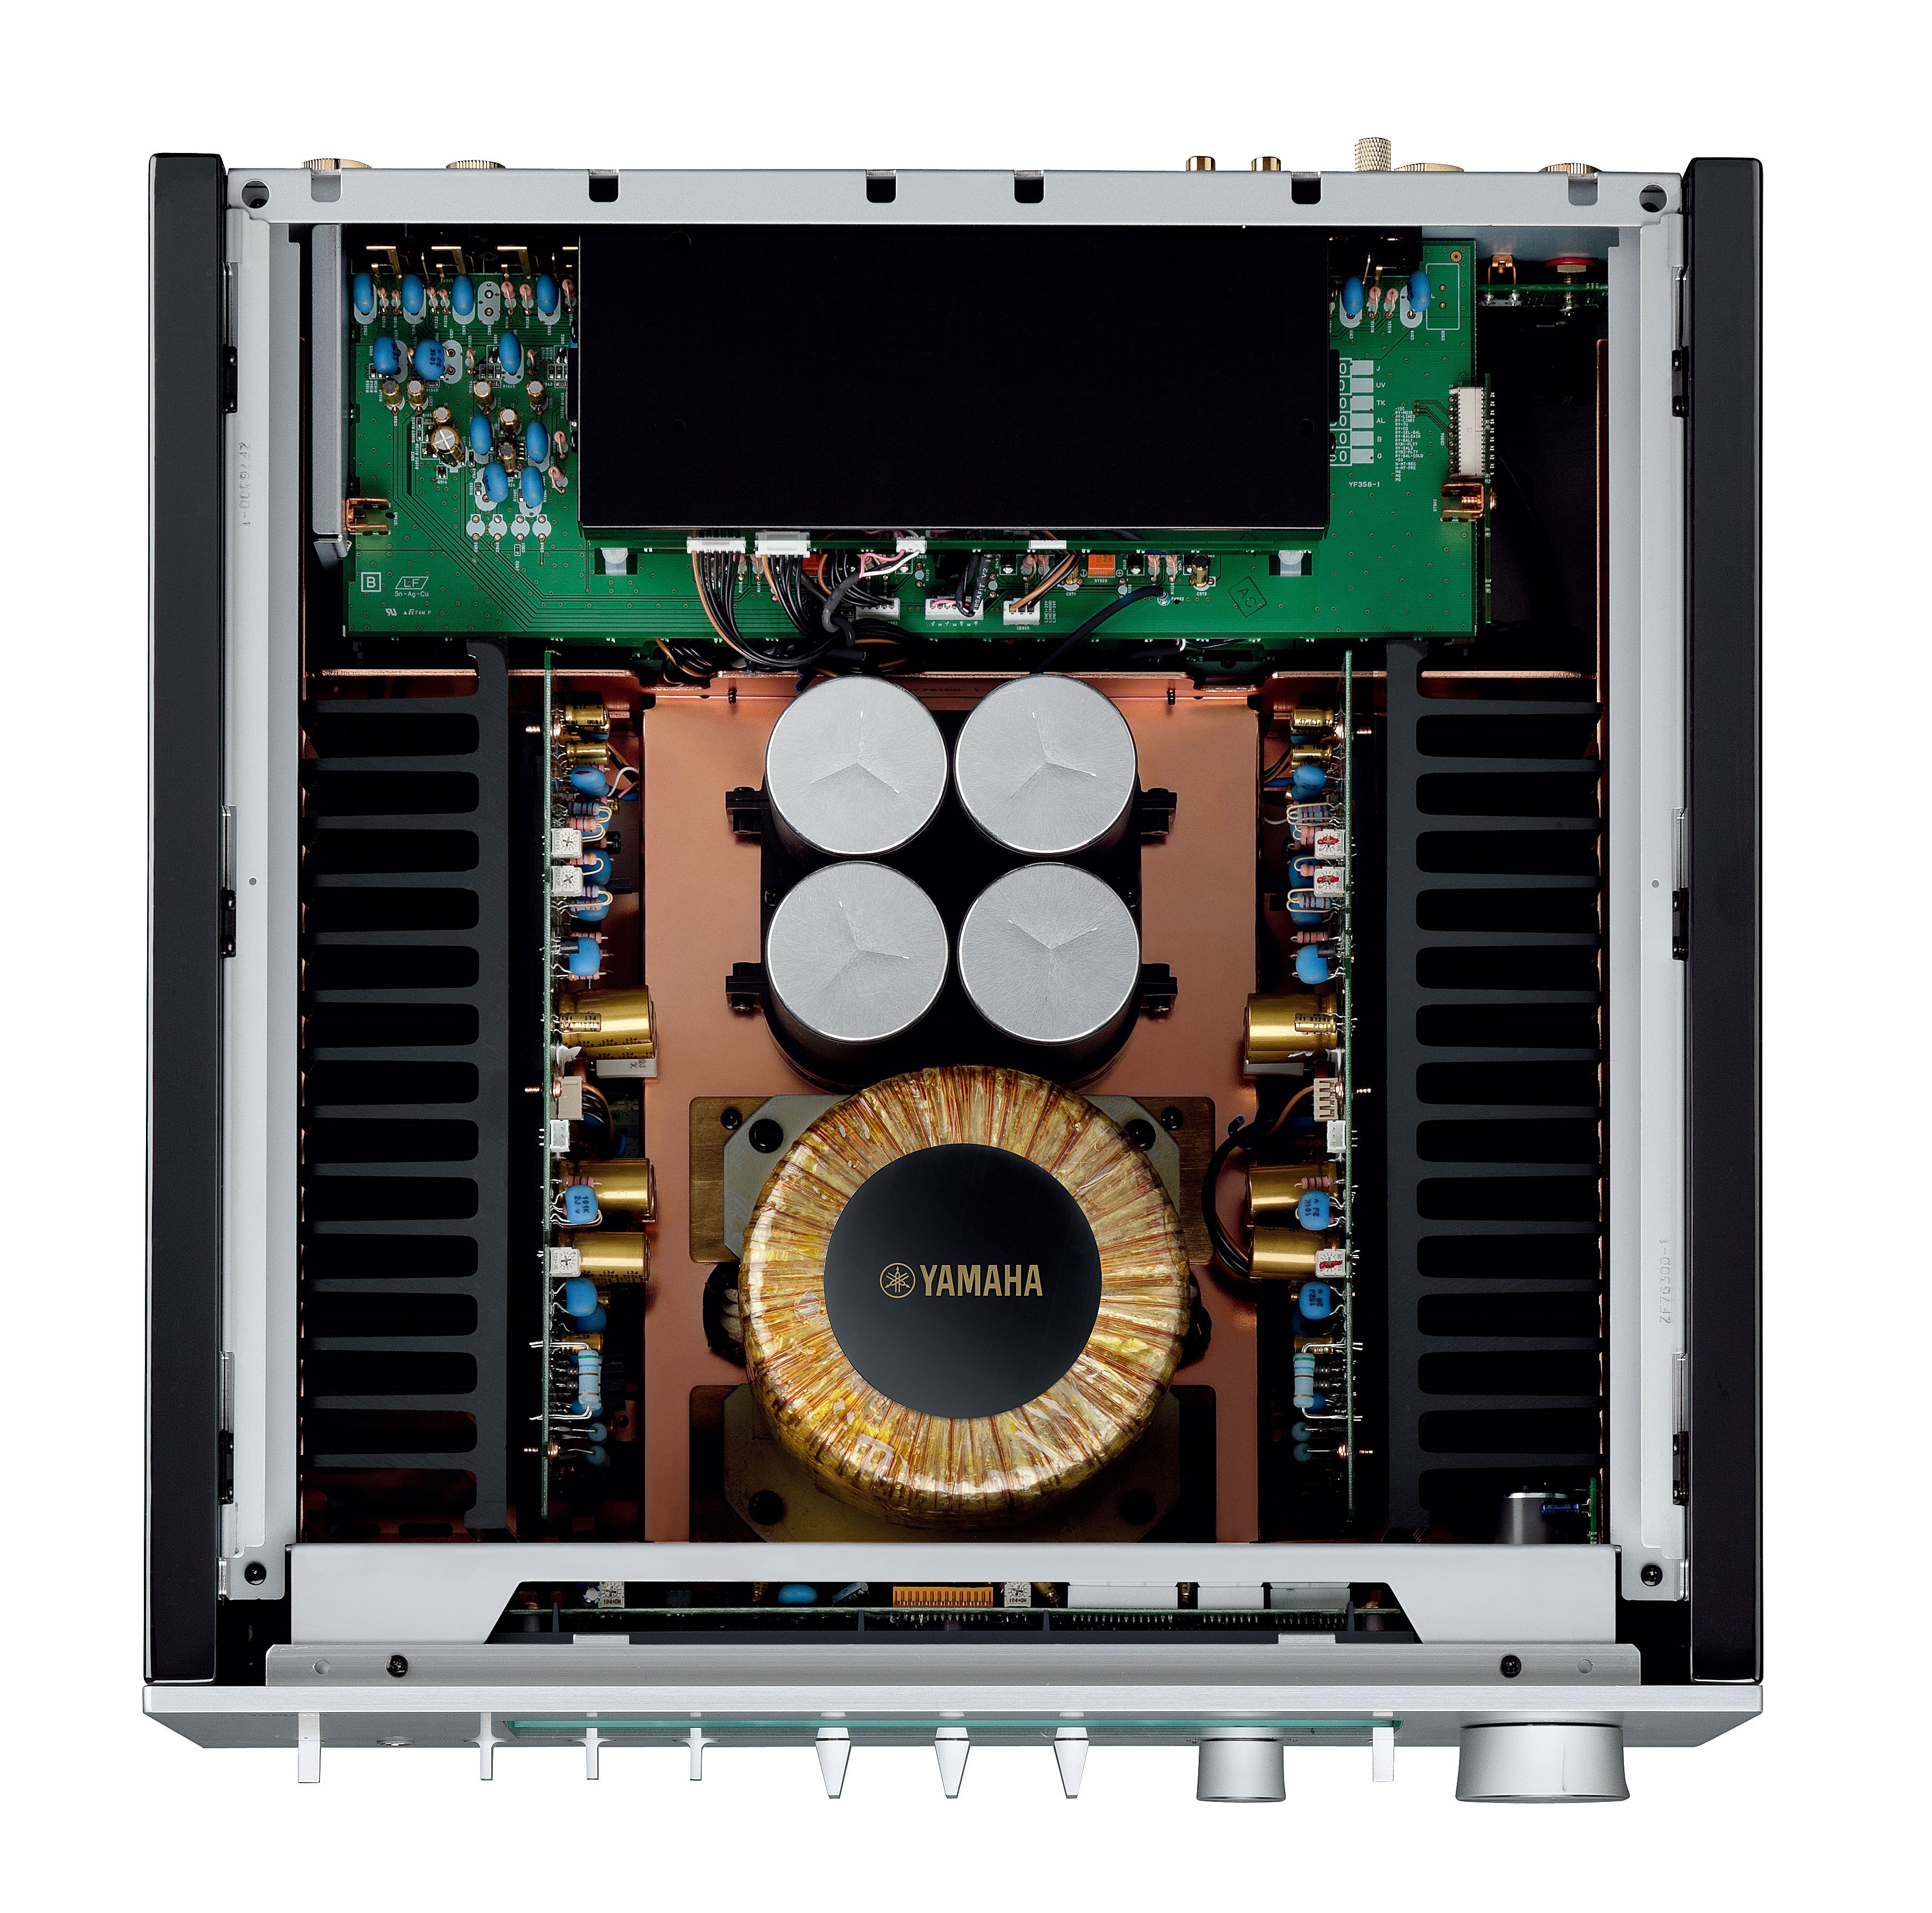 INTERGRATED AMPLIFIER A-S3000 high-end lineup, delivering supreme quality in every way